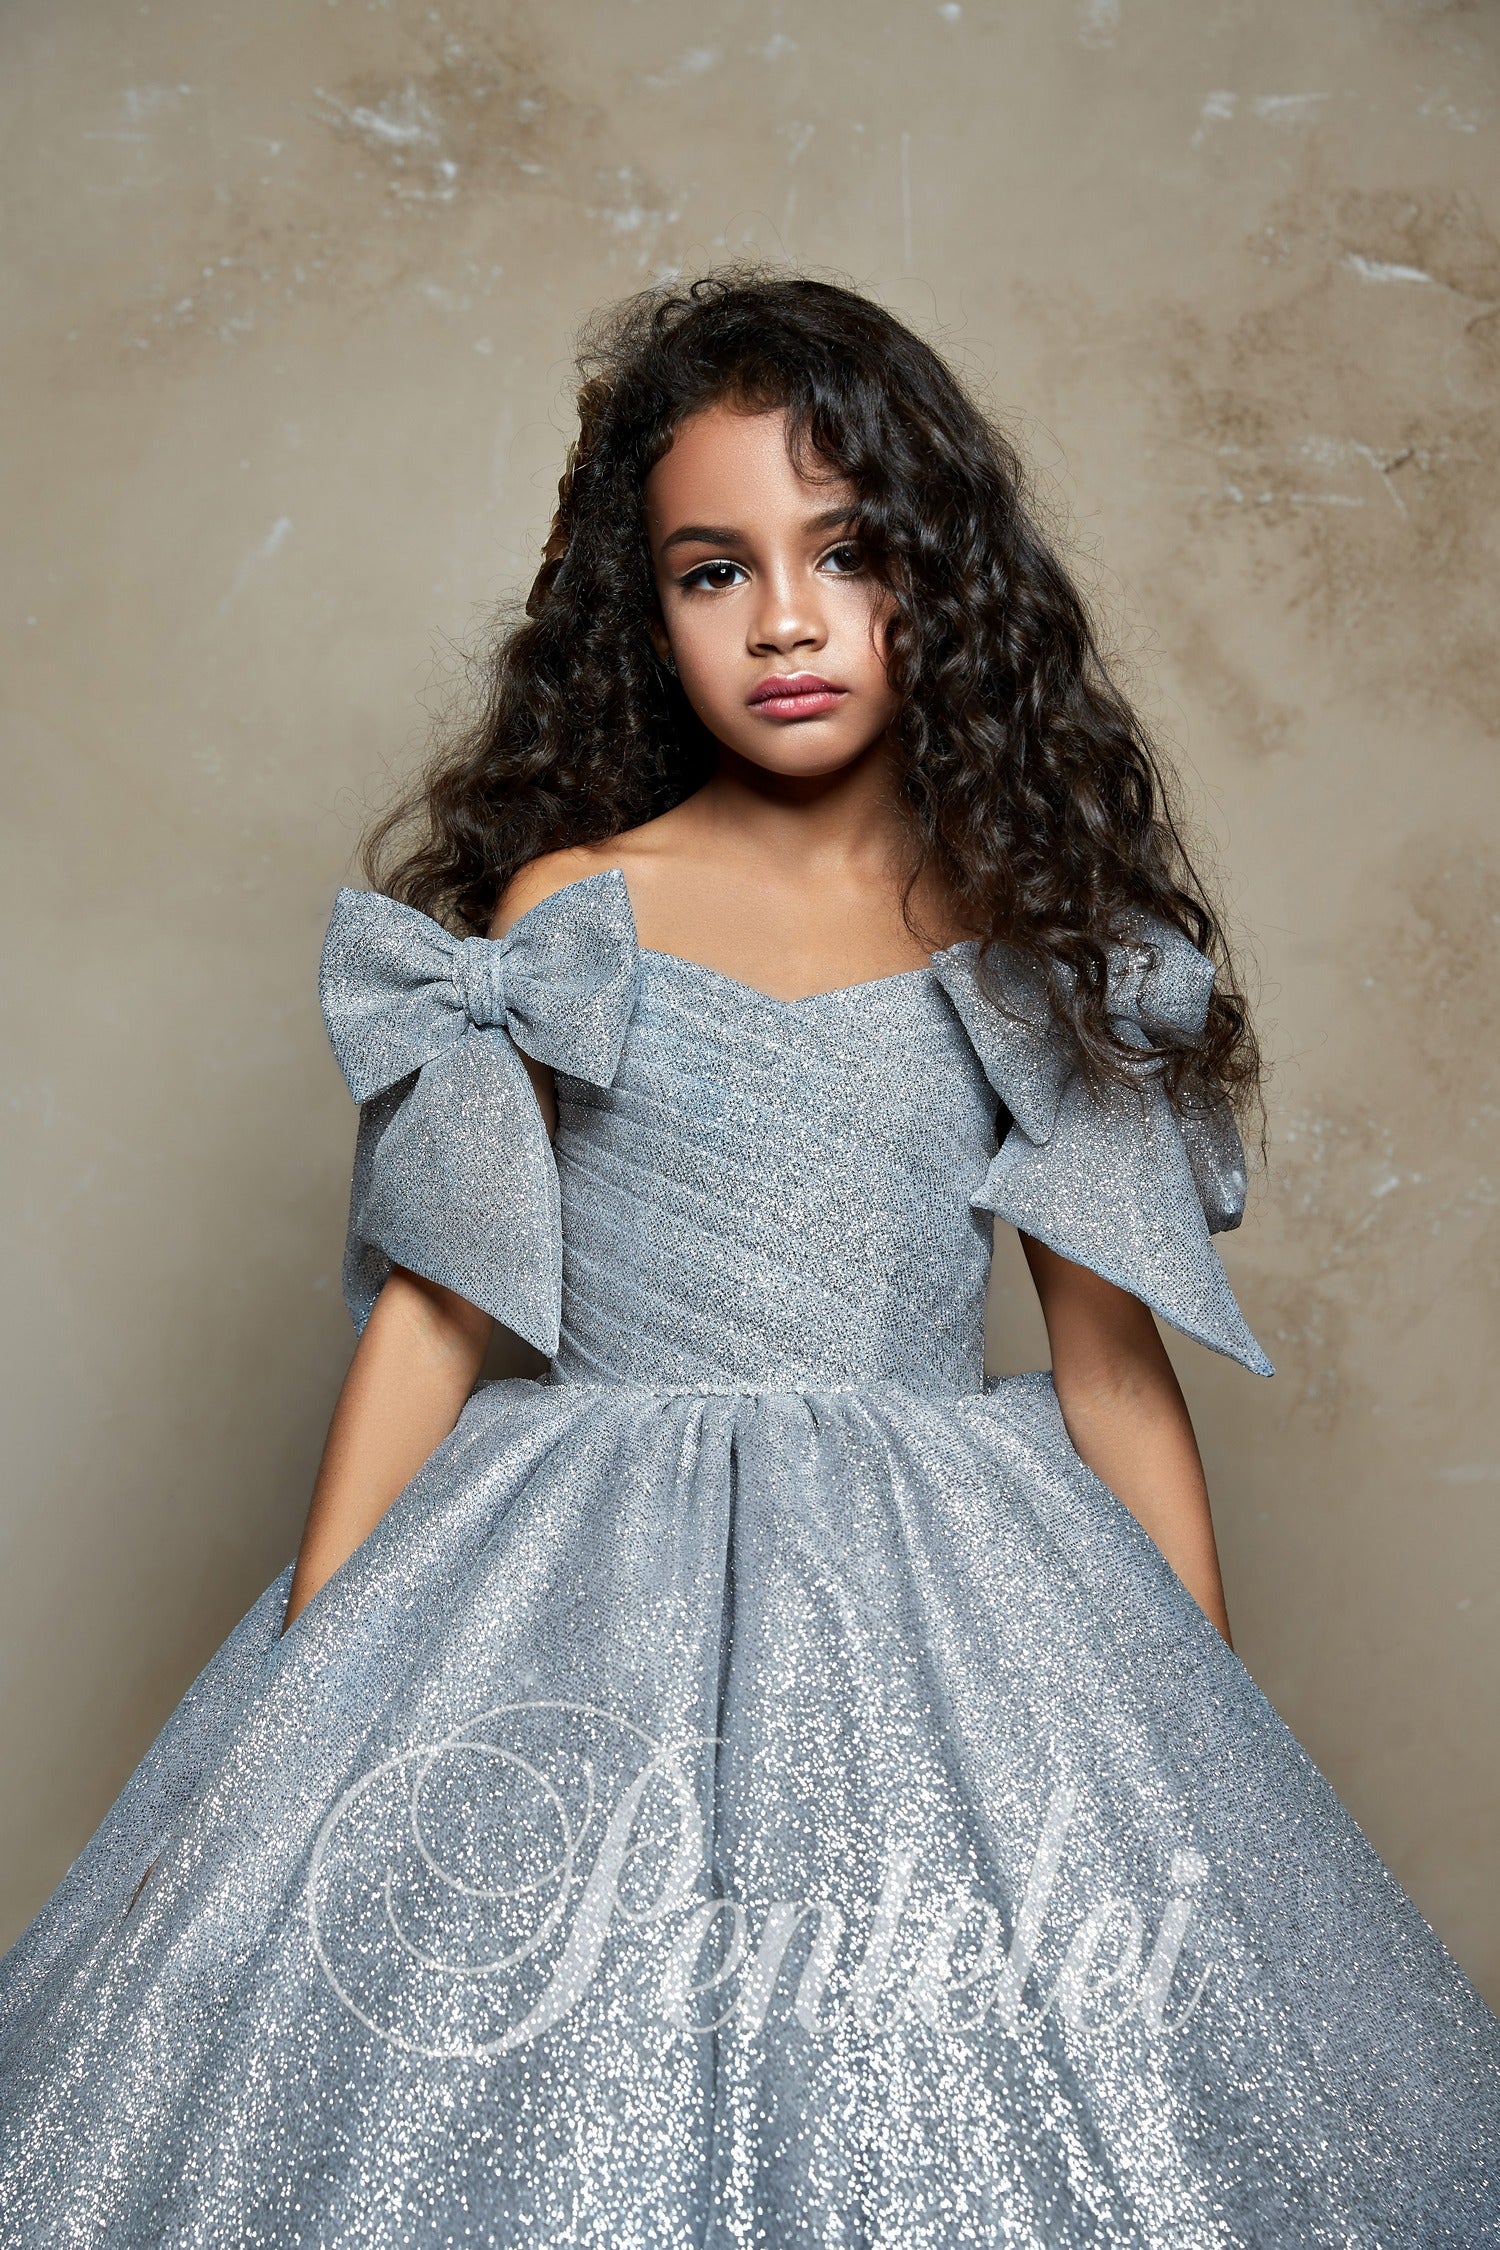 Sparkly Gowns Pentelei 1503 Magical Lace Flower Girl Dress